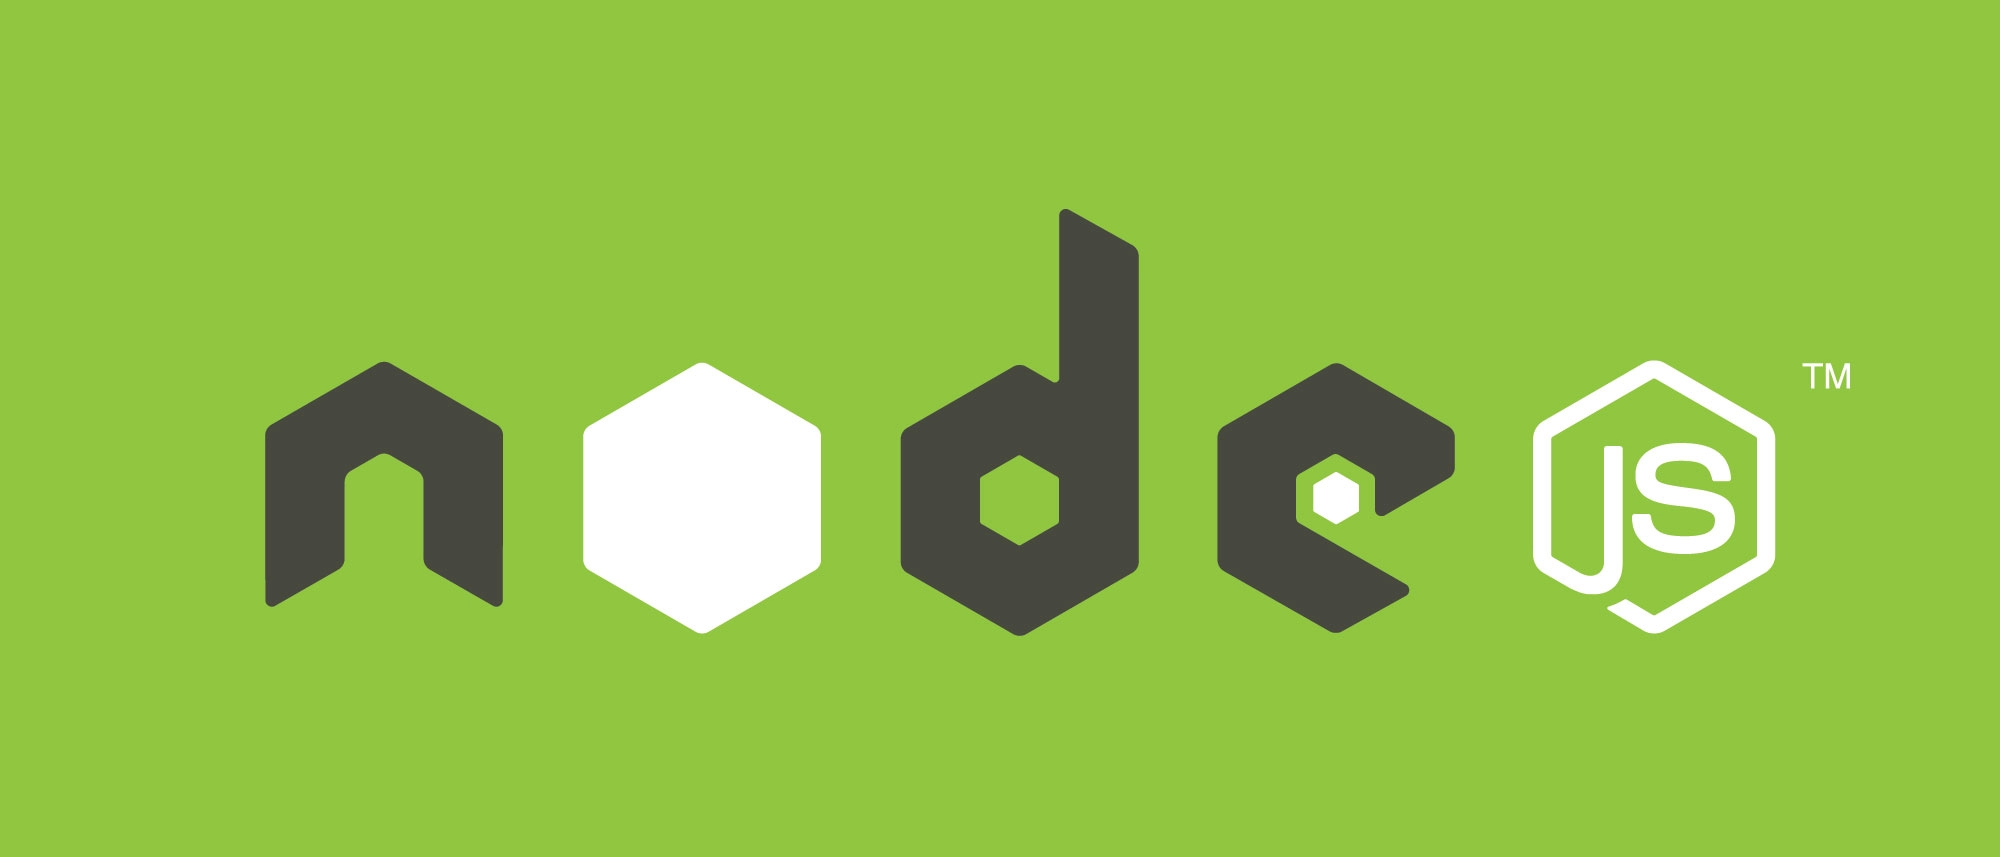 Realtime applications with Node.js 